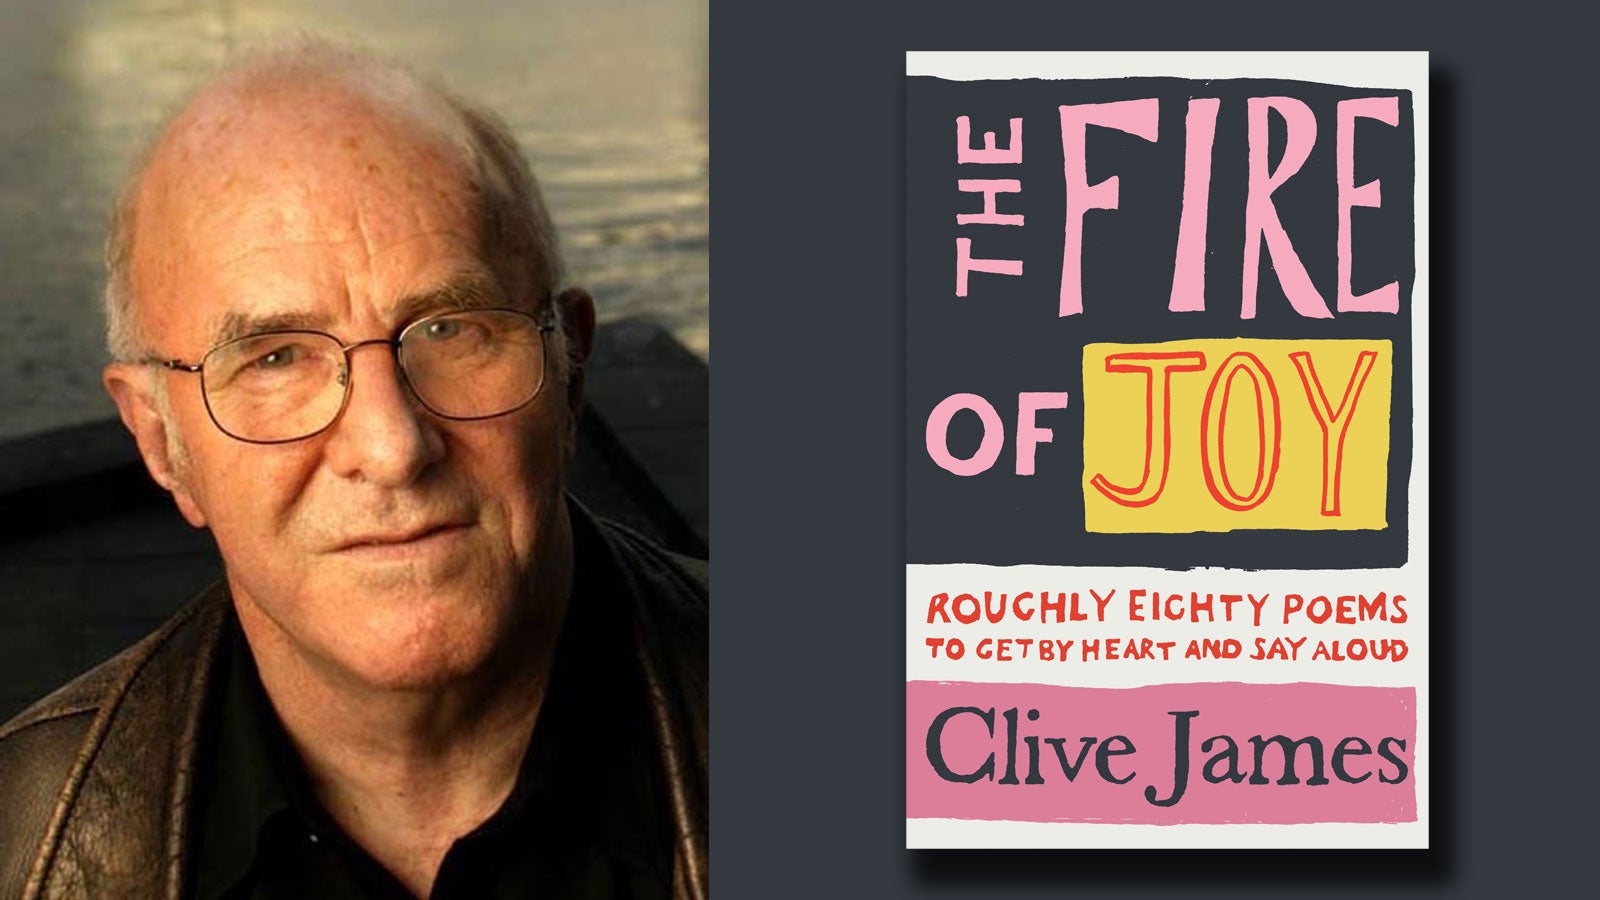 Clive James and The Fire of Joy book cover